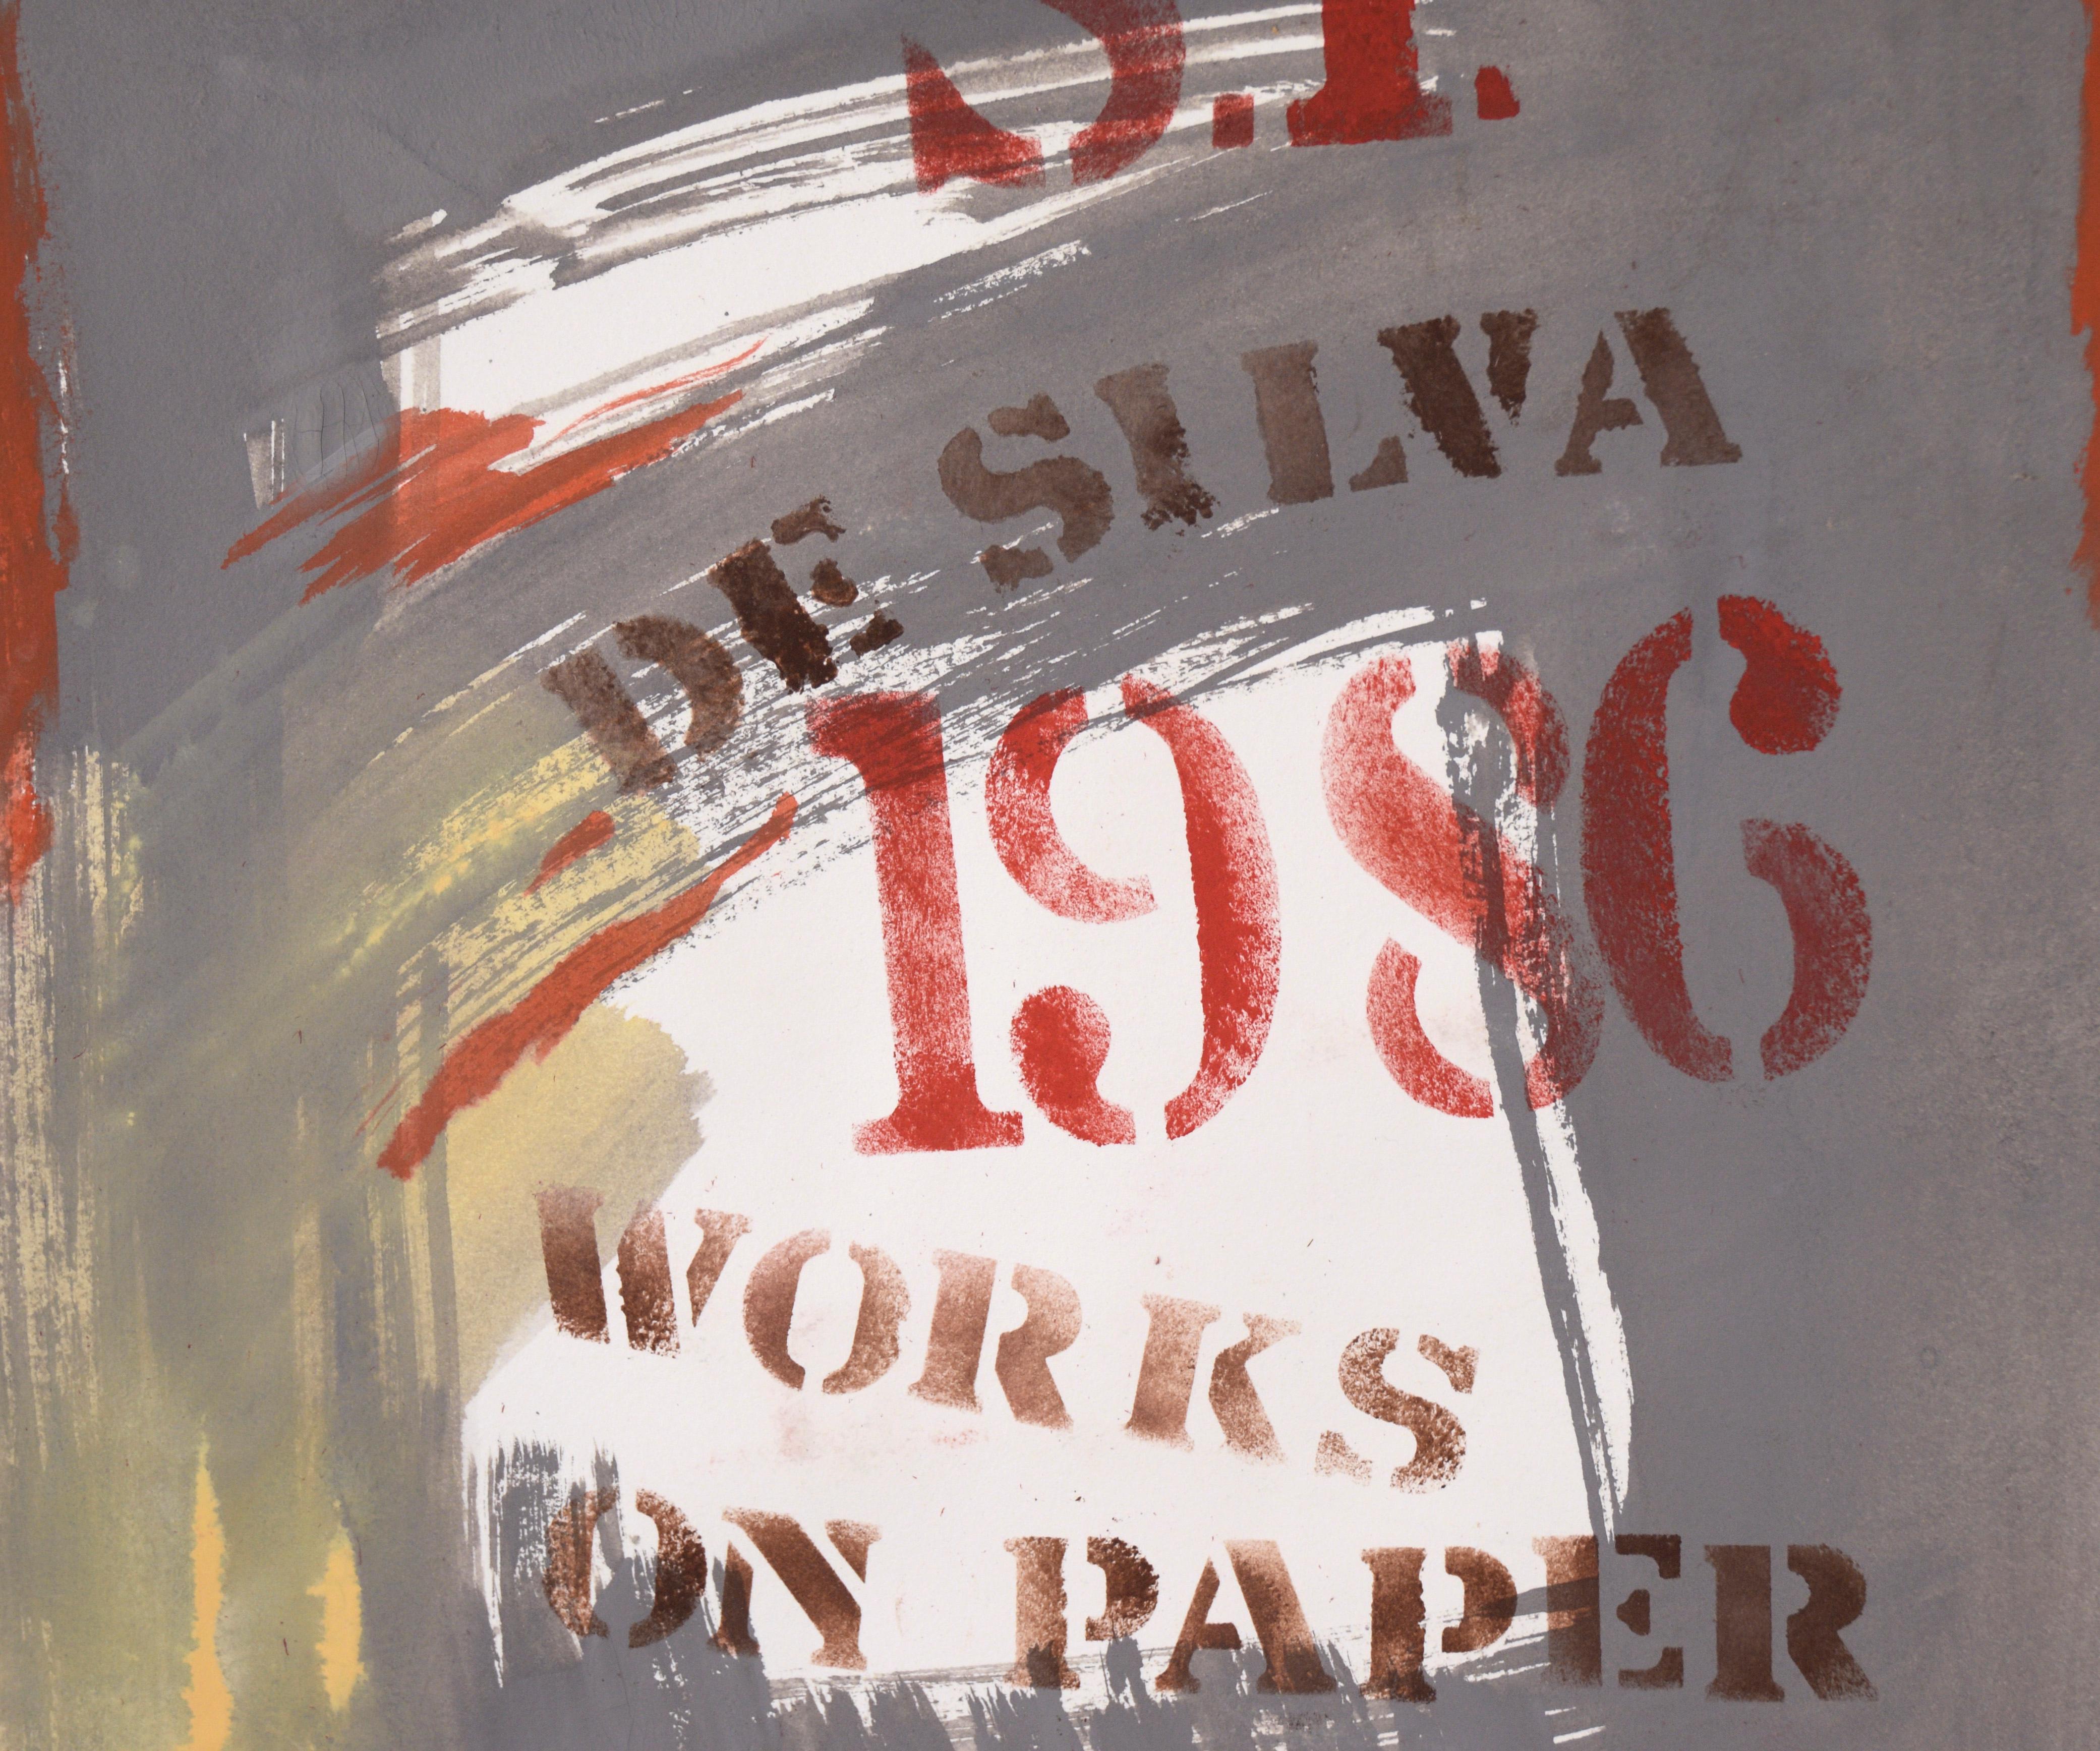 Show Poster Monoprint (Works on Paper) - Vintage Latin American School

Bold show poster by Latin American California-based artist, Ricardo de Silva (American/Brazil, 20th C). This piece is a monoprint - it was painted on a panel or glass pane and